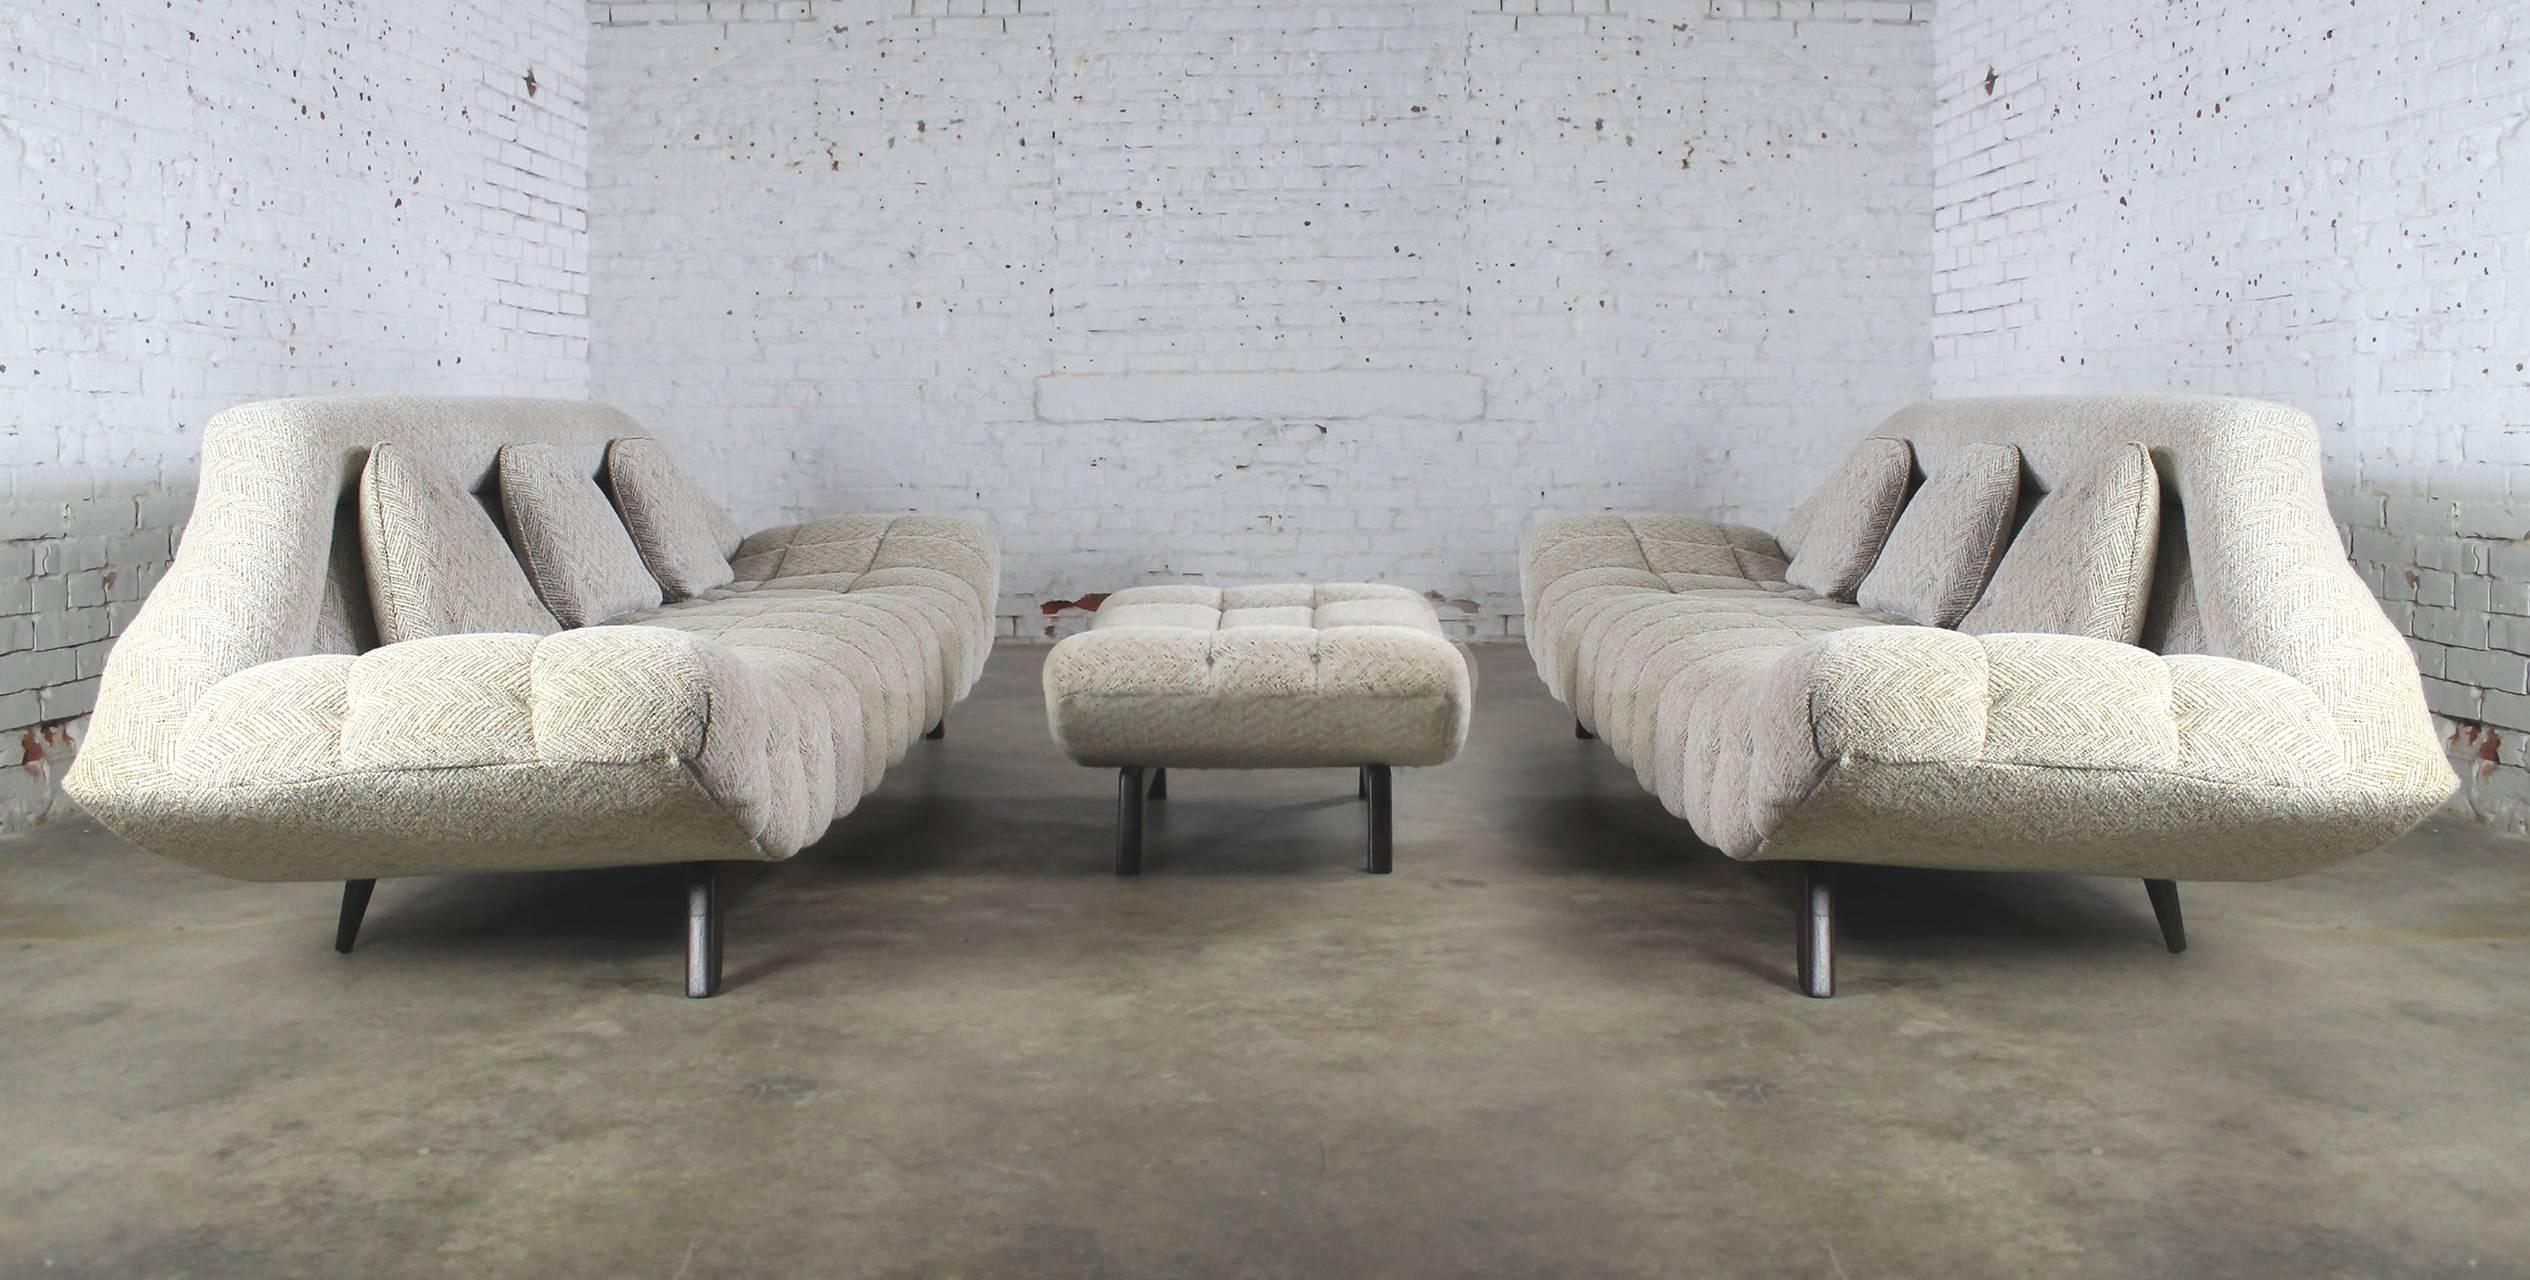 Fantastic three-piece set consisting of a pair of Adrian Pearsall style gondola sofas and matching ottoman. The epitome of Mid-Century Modern high style design, circa 1960. The set is in incredible condition.

This is one of those sets you rarely